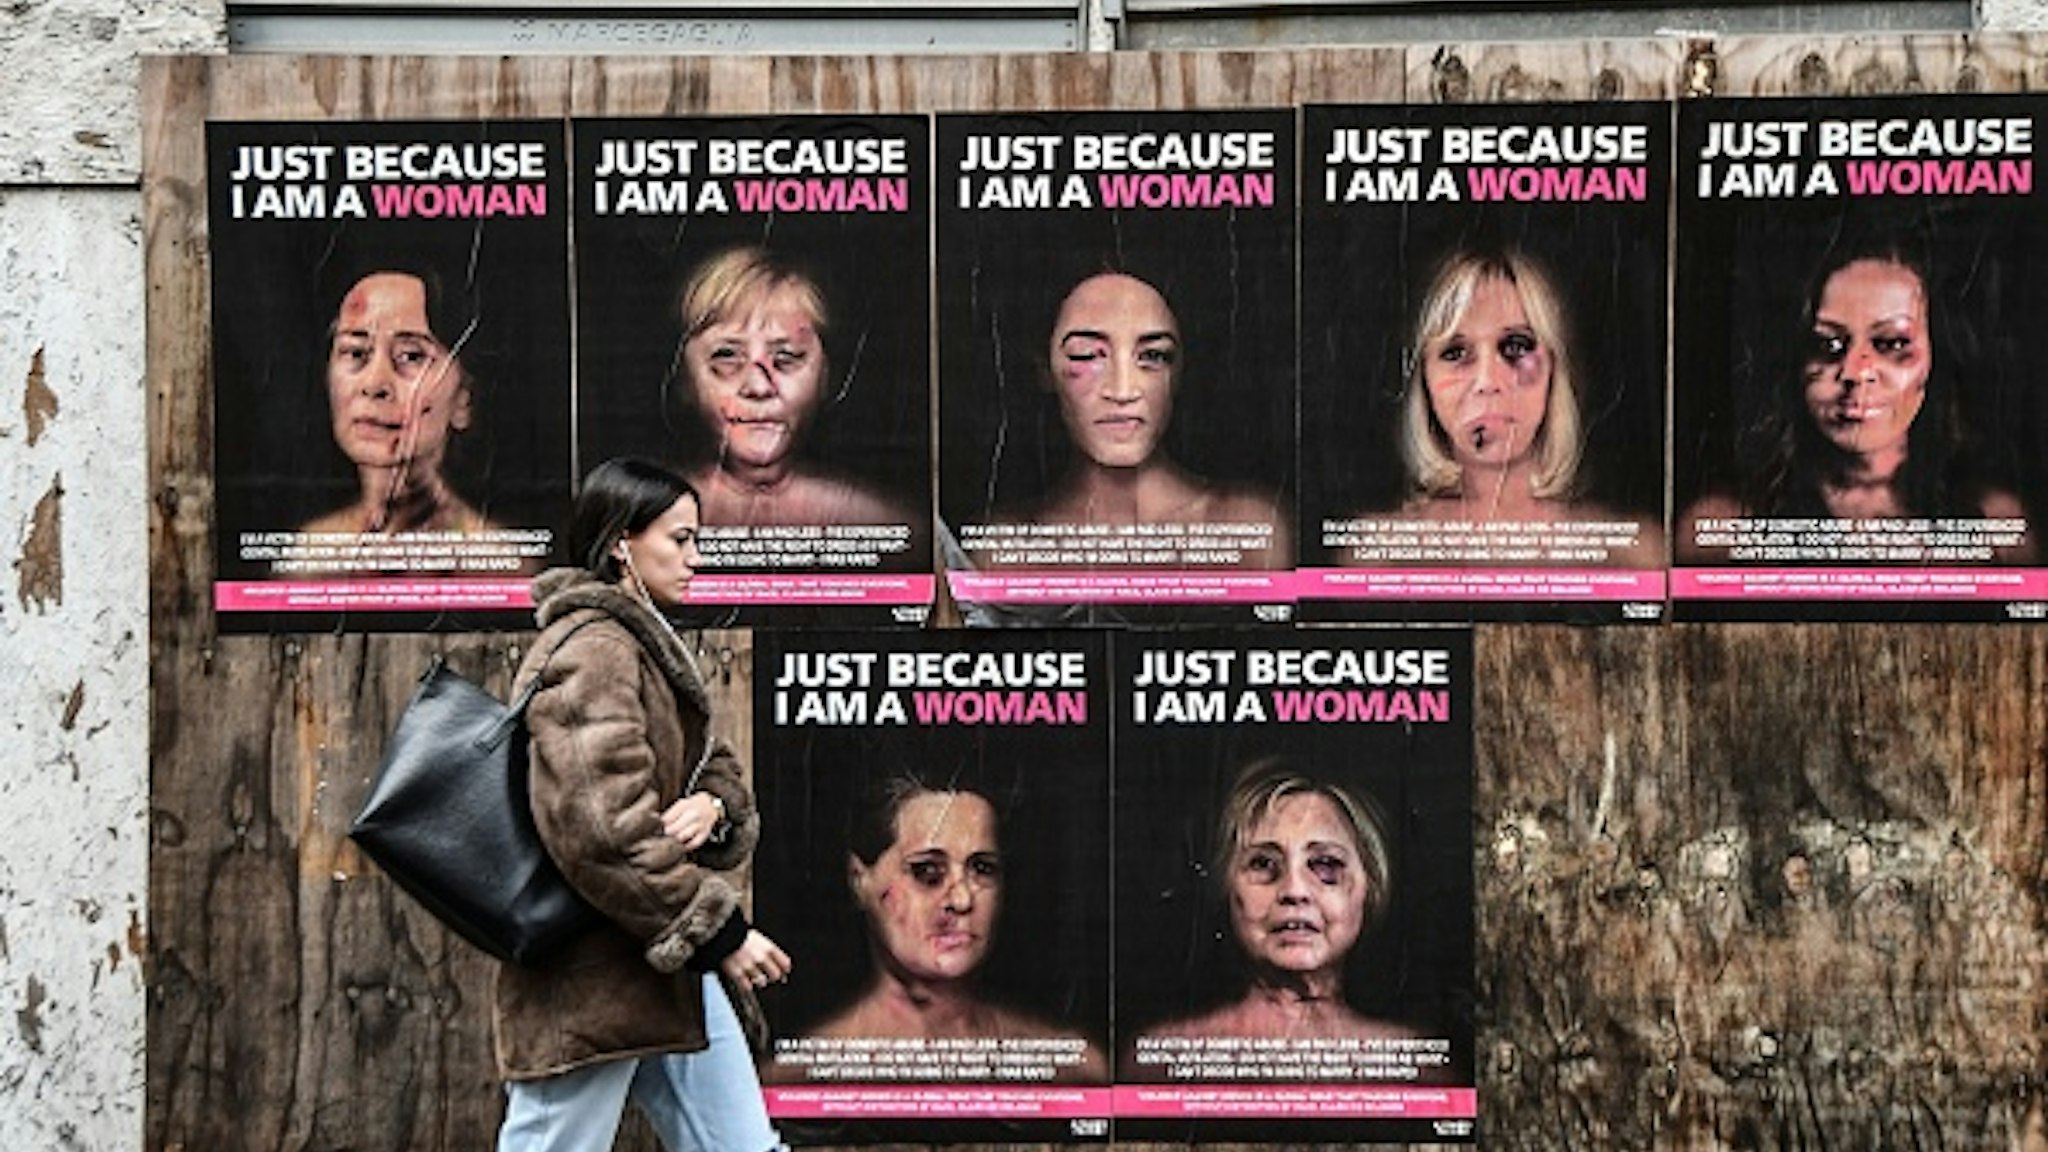 TOPSHOT - A woman walks past "Just because I am a Woman", a new series of works by Italian pop artist and activist aleXsandro Palombo, depicting some of the women protagonists of world politics as victims of gender violence : (Clockwise from Top L) Burmese politician Aung San Suu Kyi, German Chancellor Angela Merkel, member of the US House of Representatives Alexandria Ocasio-Cortez, the wife of the French president Brigitte Macron, former US First Lady Michelle Obama, former US First Lady and former US secretary of state Hillary Clinton and president of the Indian National Congress Sonia Gandhi, on January 15, 2020 in downtown Milan. - The series aims at raising awareness and get response from the institutions and the politics about domestic violence against women worldwide. (Photo by Miguel MEDINA / AFP) / RESTRICTED TO EDITORIAL USE - MANDATORY MENTION OF THE ARTIST UPON PUBLICATION - TO ILLUSTRATE THE EVENT AS SPECIFIED IN THE CAPTION